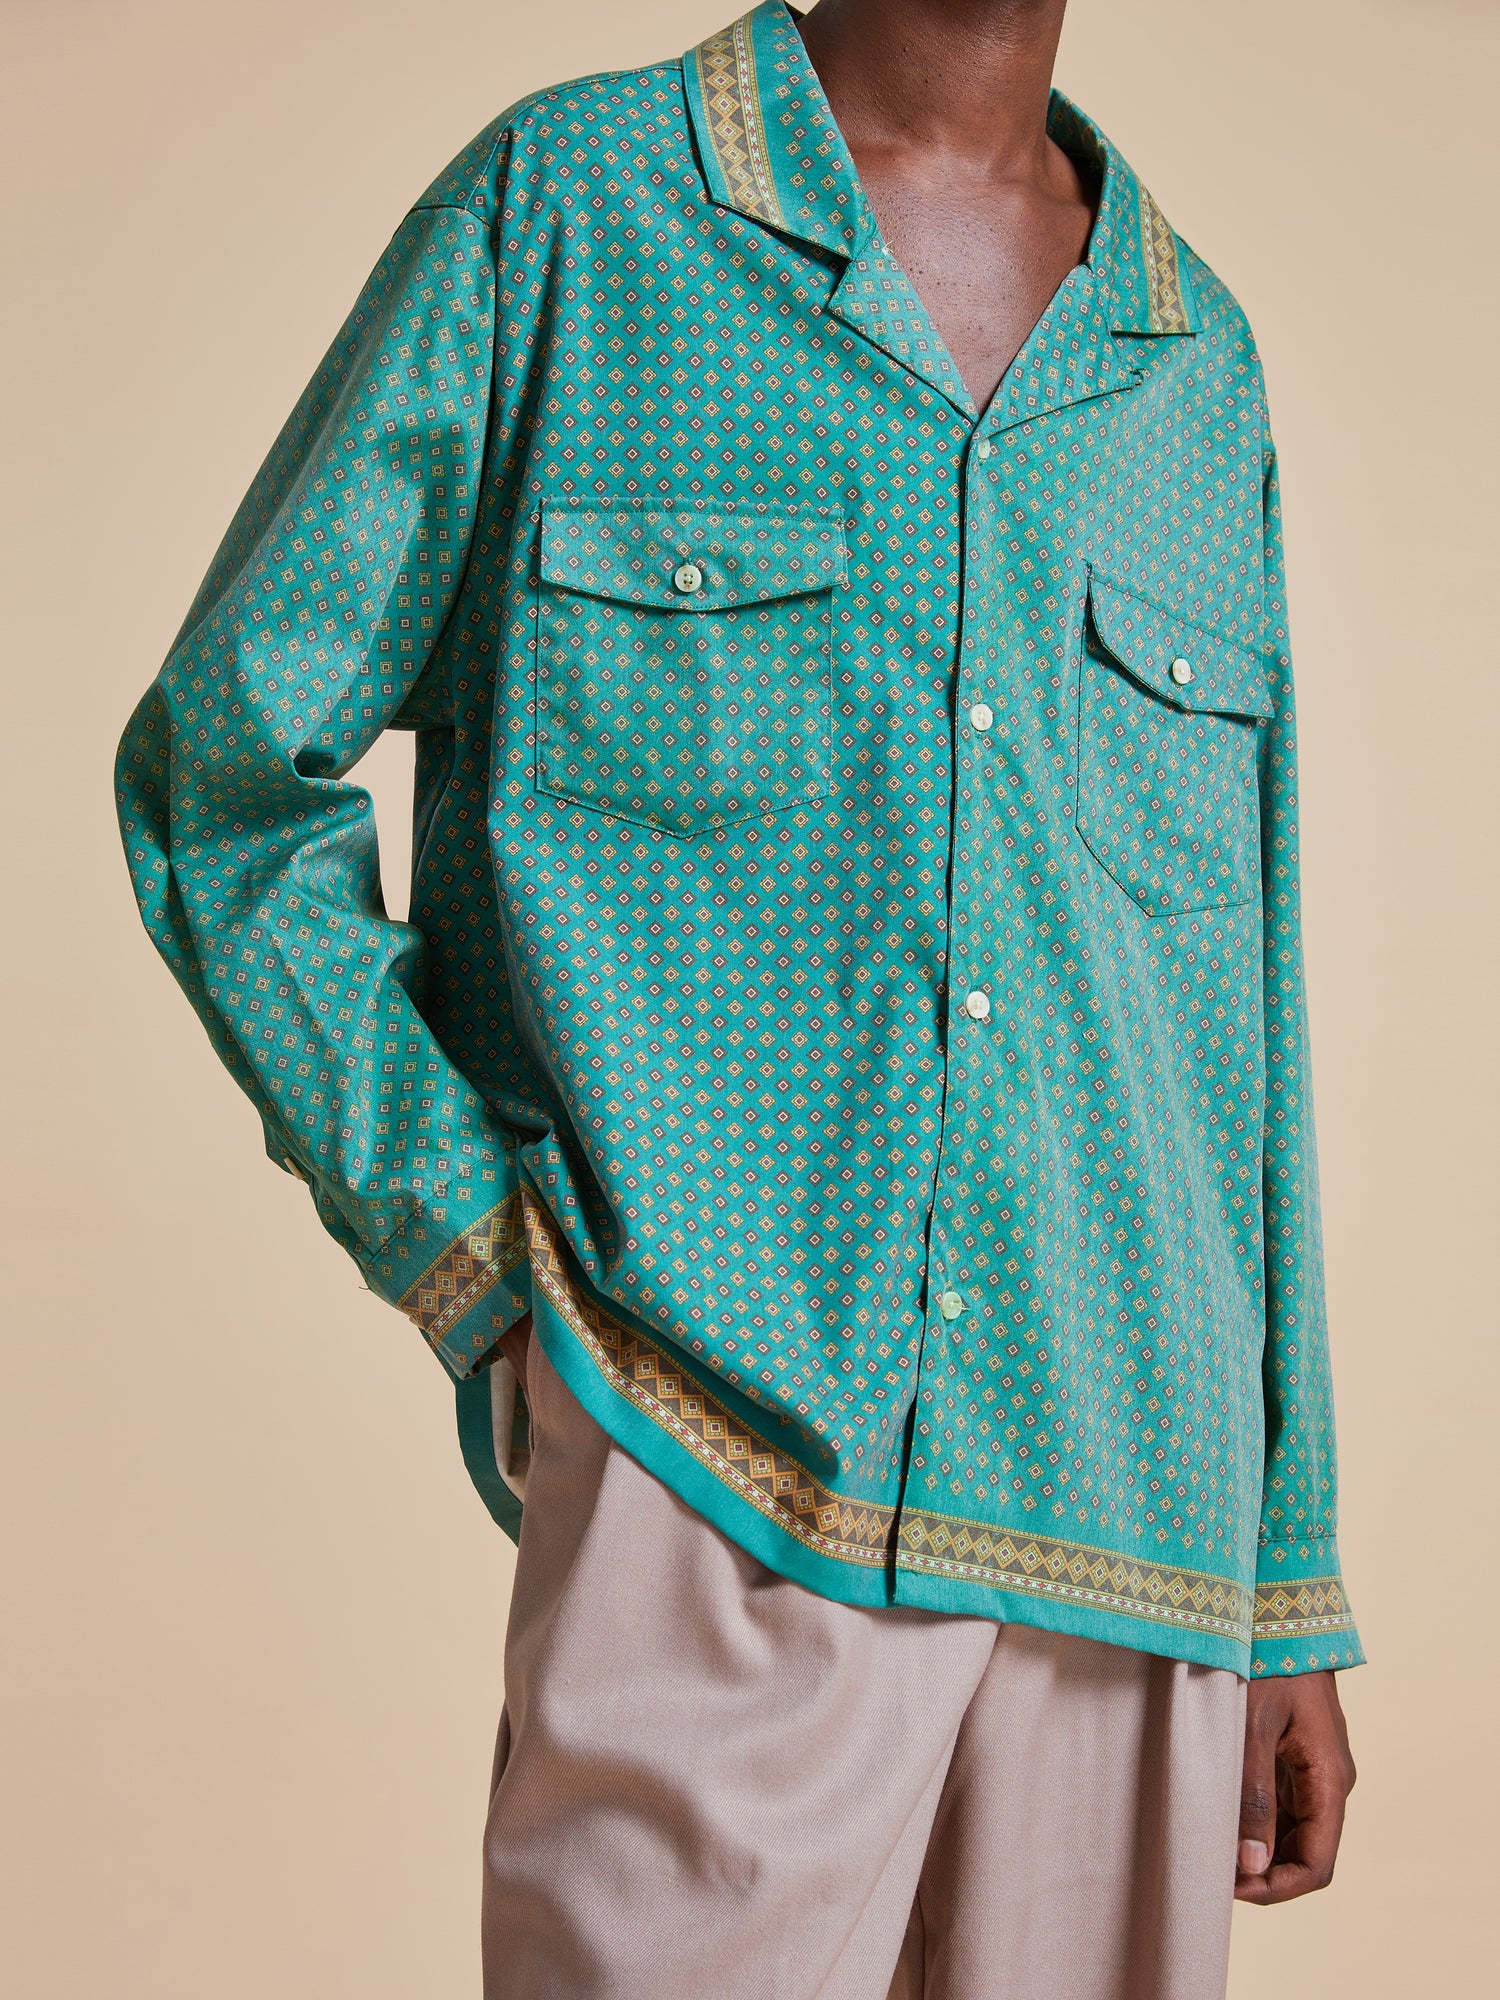 A man wearing the Found Arbor Long Sleeve Camp Shirt with traditional Indo-Aryan patterns and khaki pants.